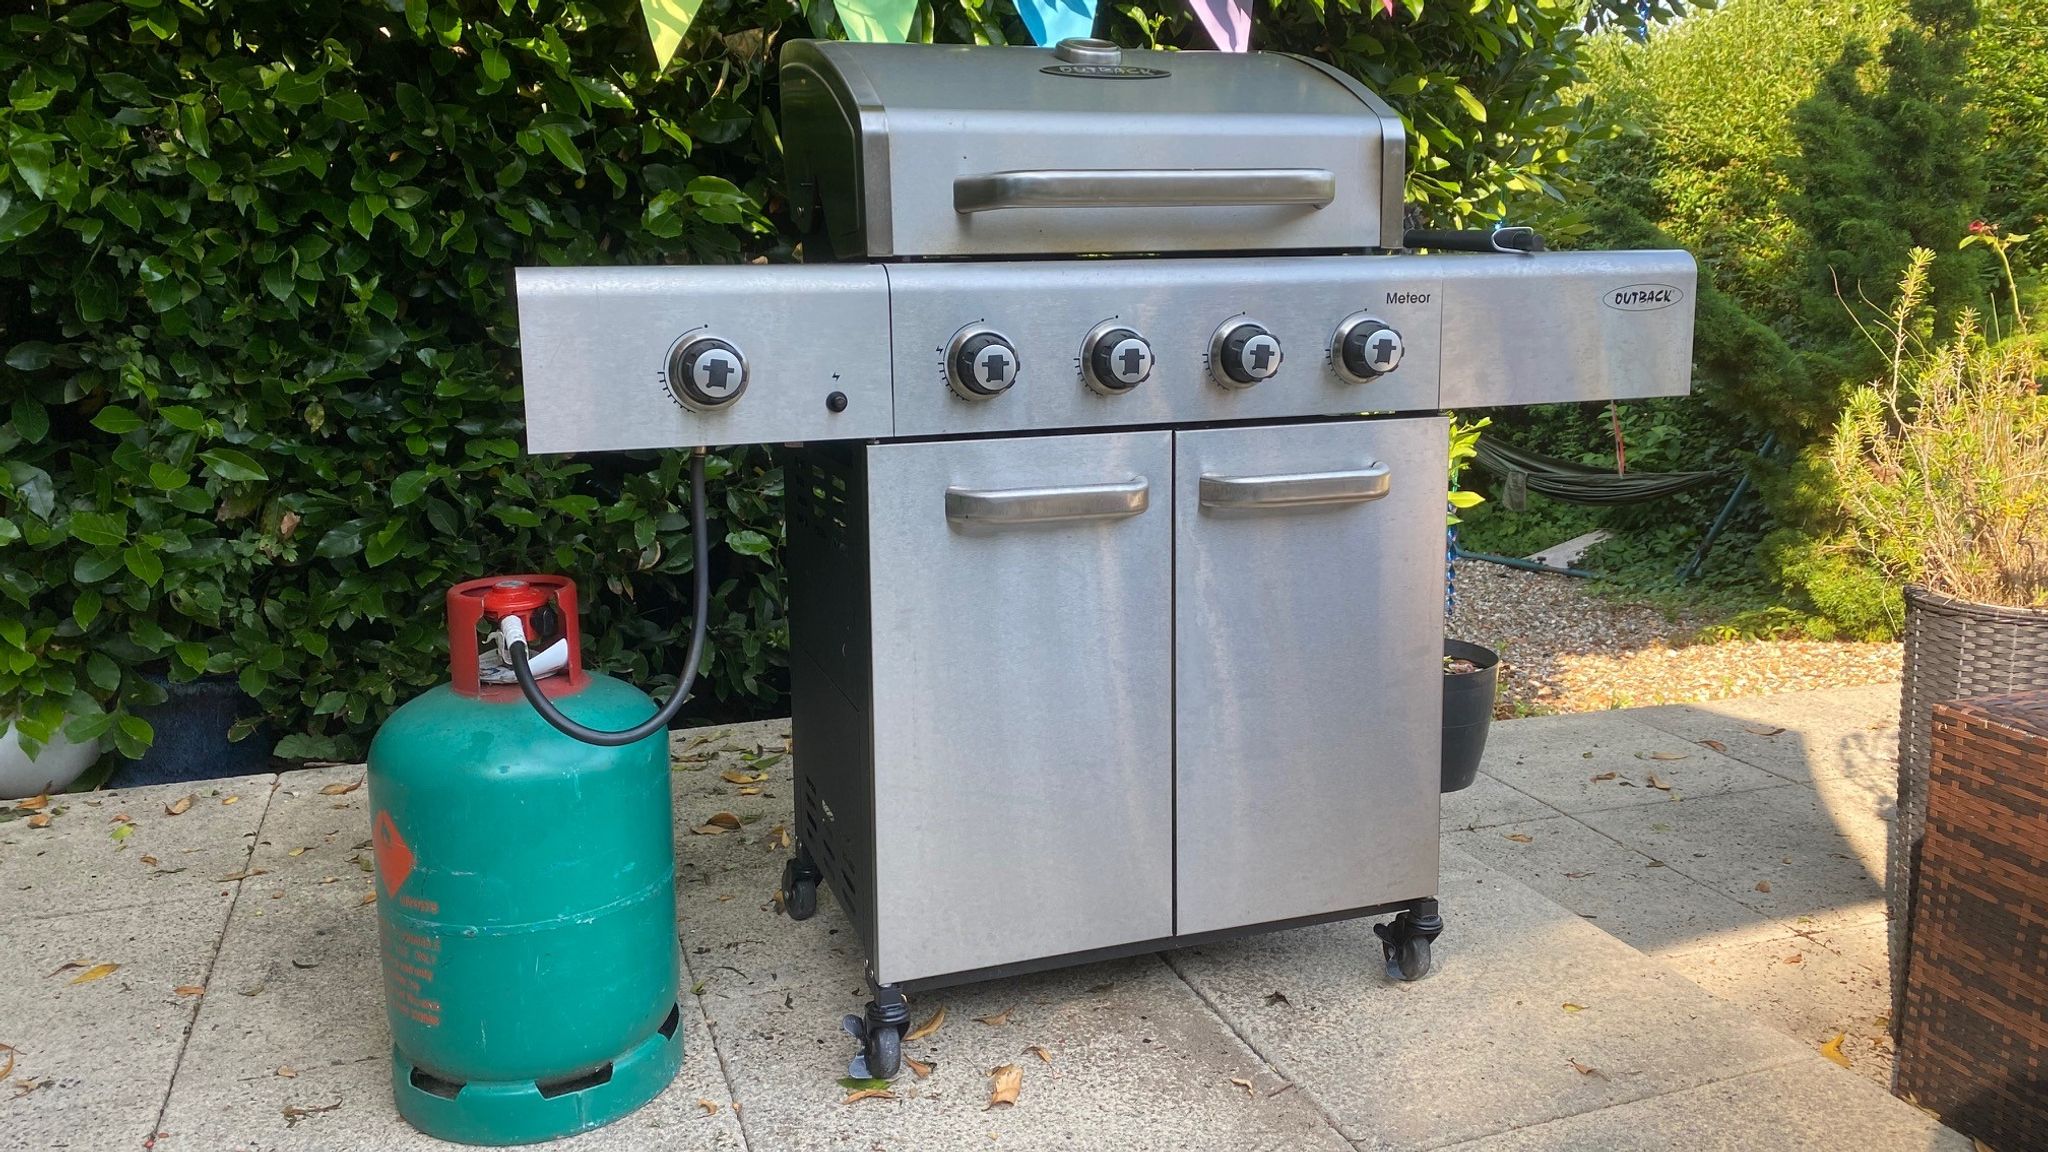 Barbecues threatened as gas cylinder shortage 'exacerbated by pingdemic', Business News